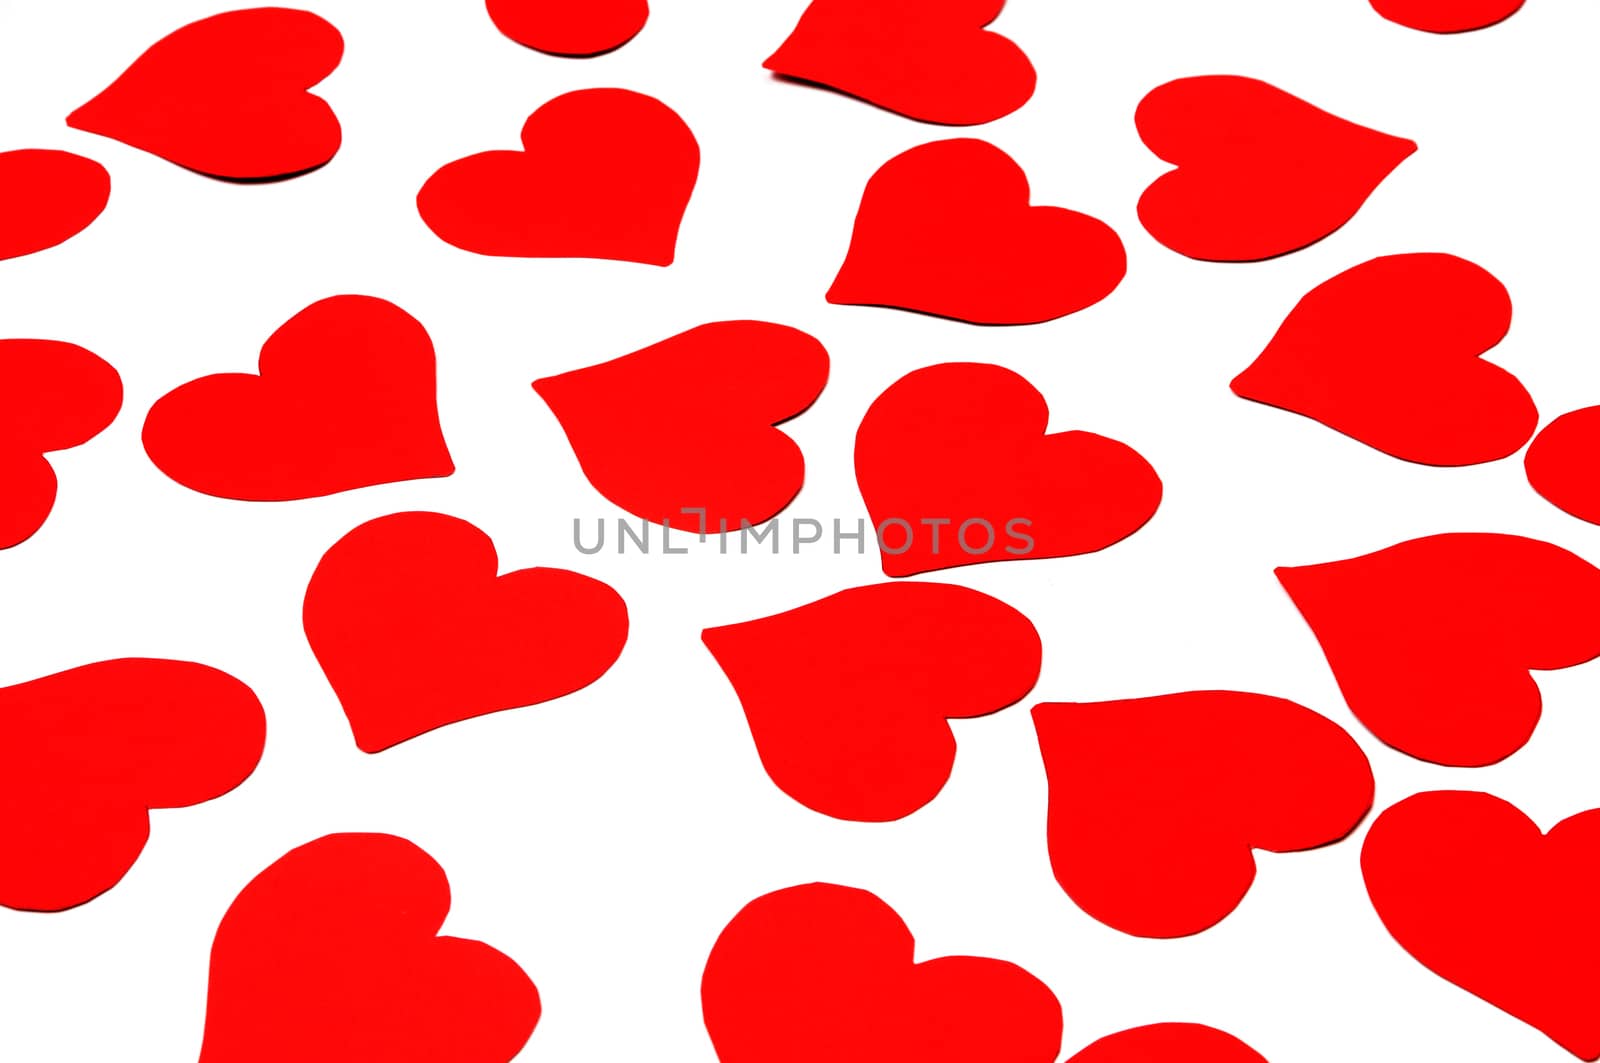 small hearts on a white background